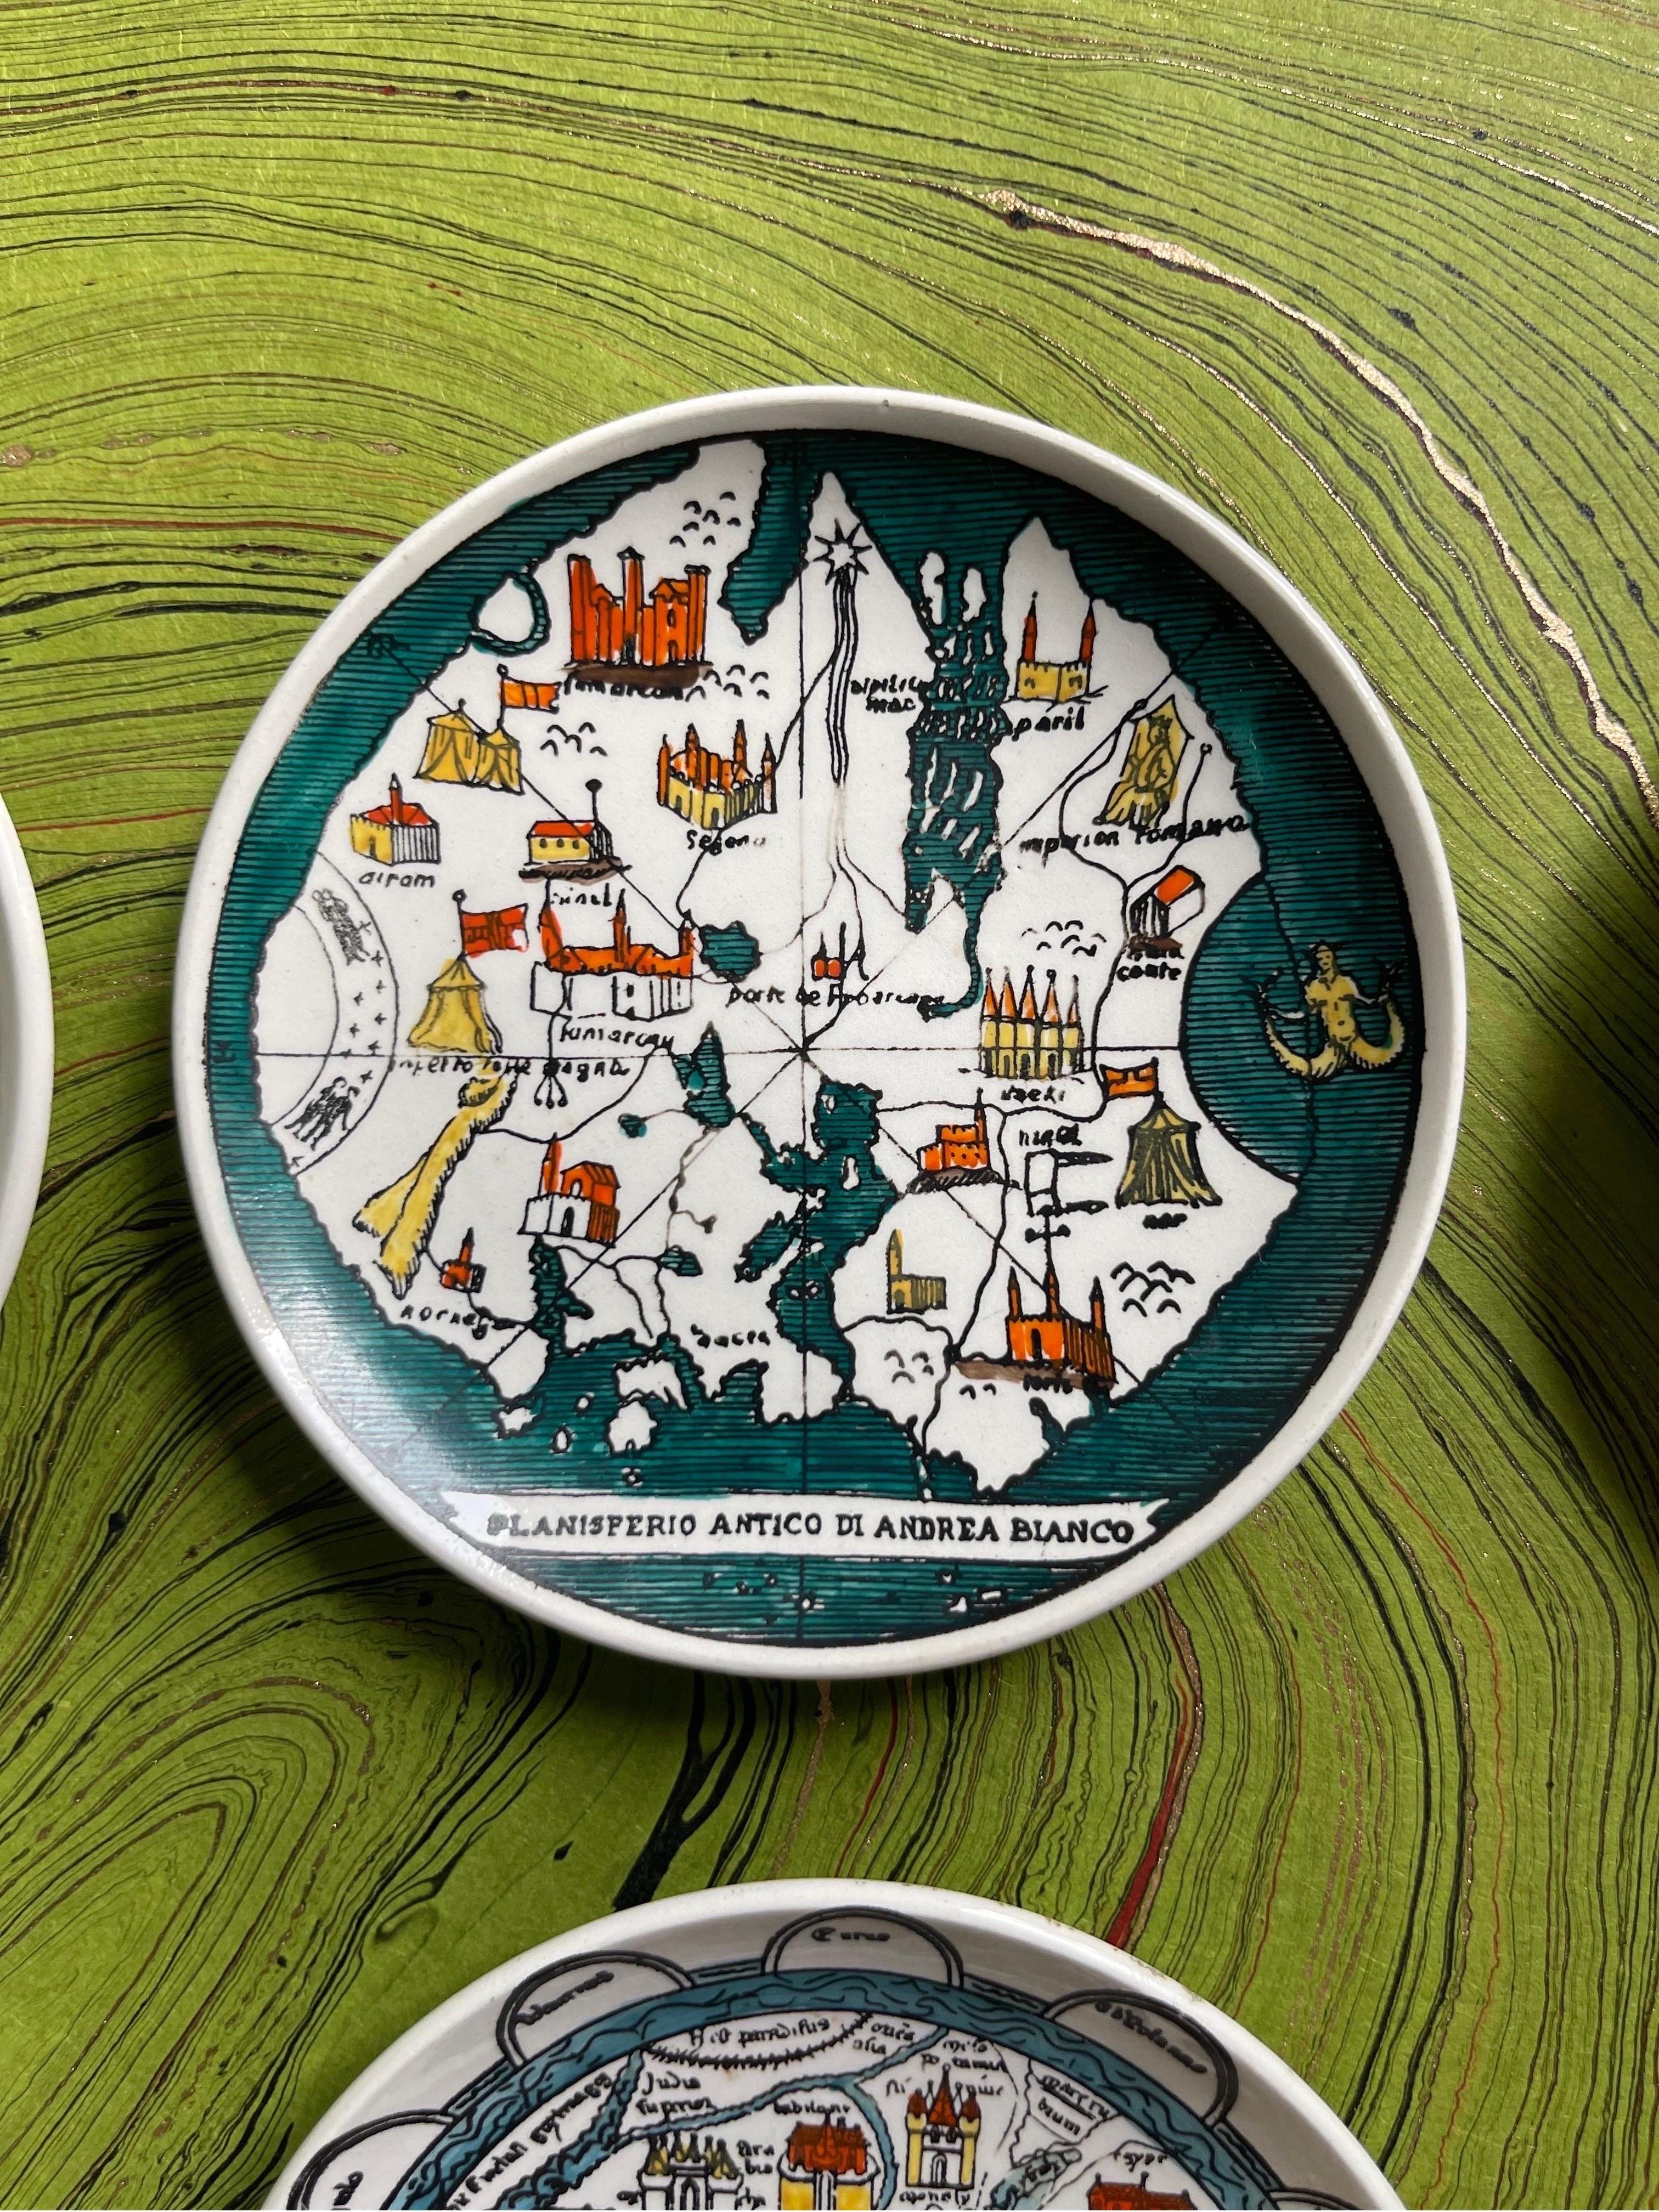 Fornasetti “Antichi Planisferi” Hand Painted Map Small Plates or Coasters 1